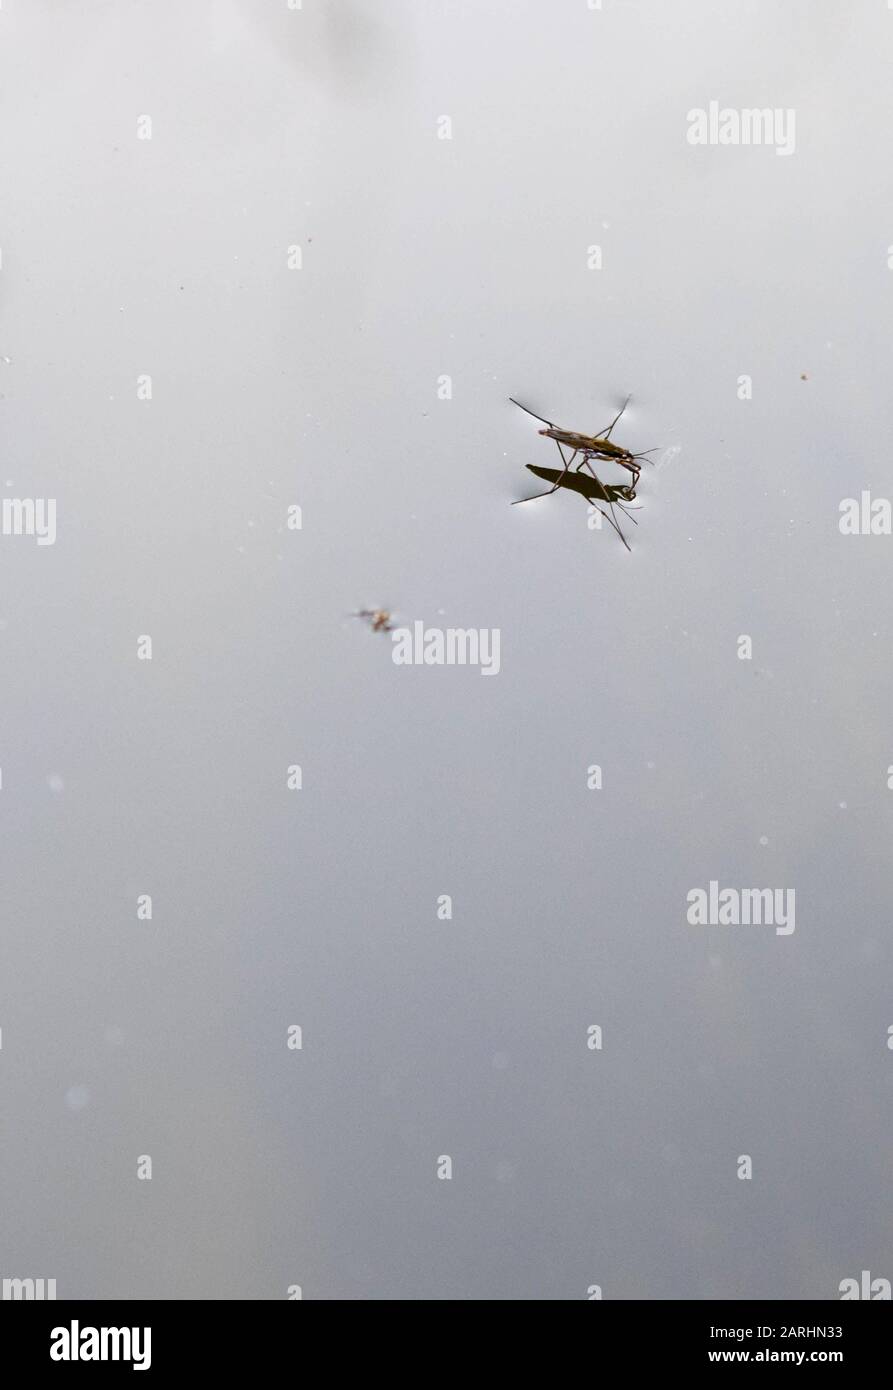 Water strider on surface of water Stock Photo